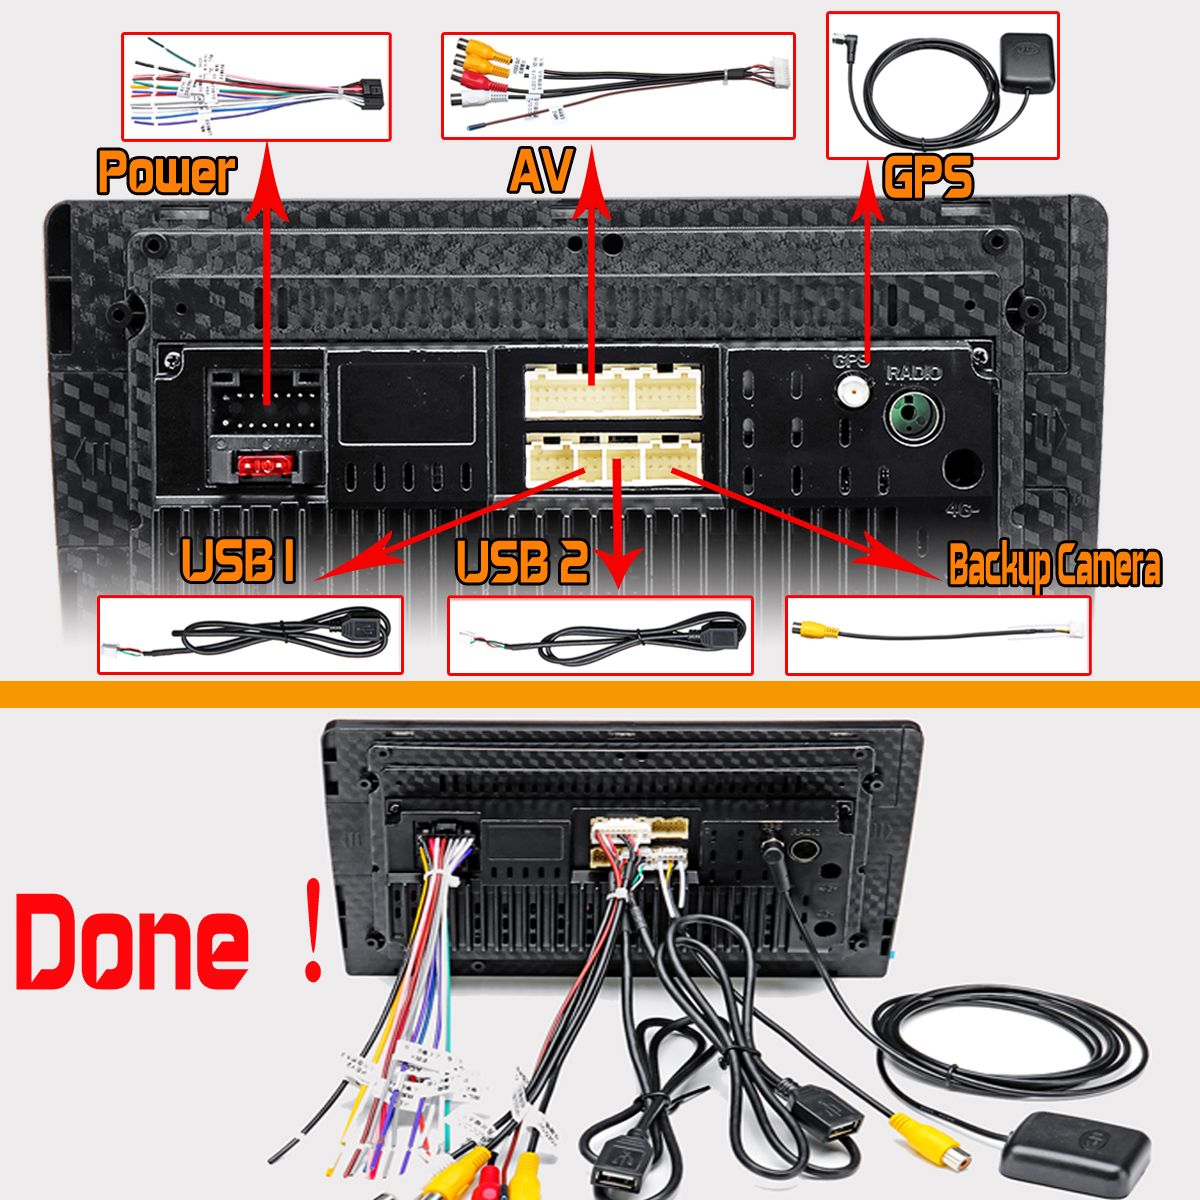 101-Inch-2-DIN-For-Android-80-Car-Stereo-Radio-25D-Touch-Screen-4-Core-2G32G-Screen-WIFI-GPS-Navigat-1432315